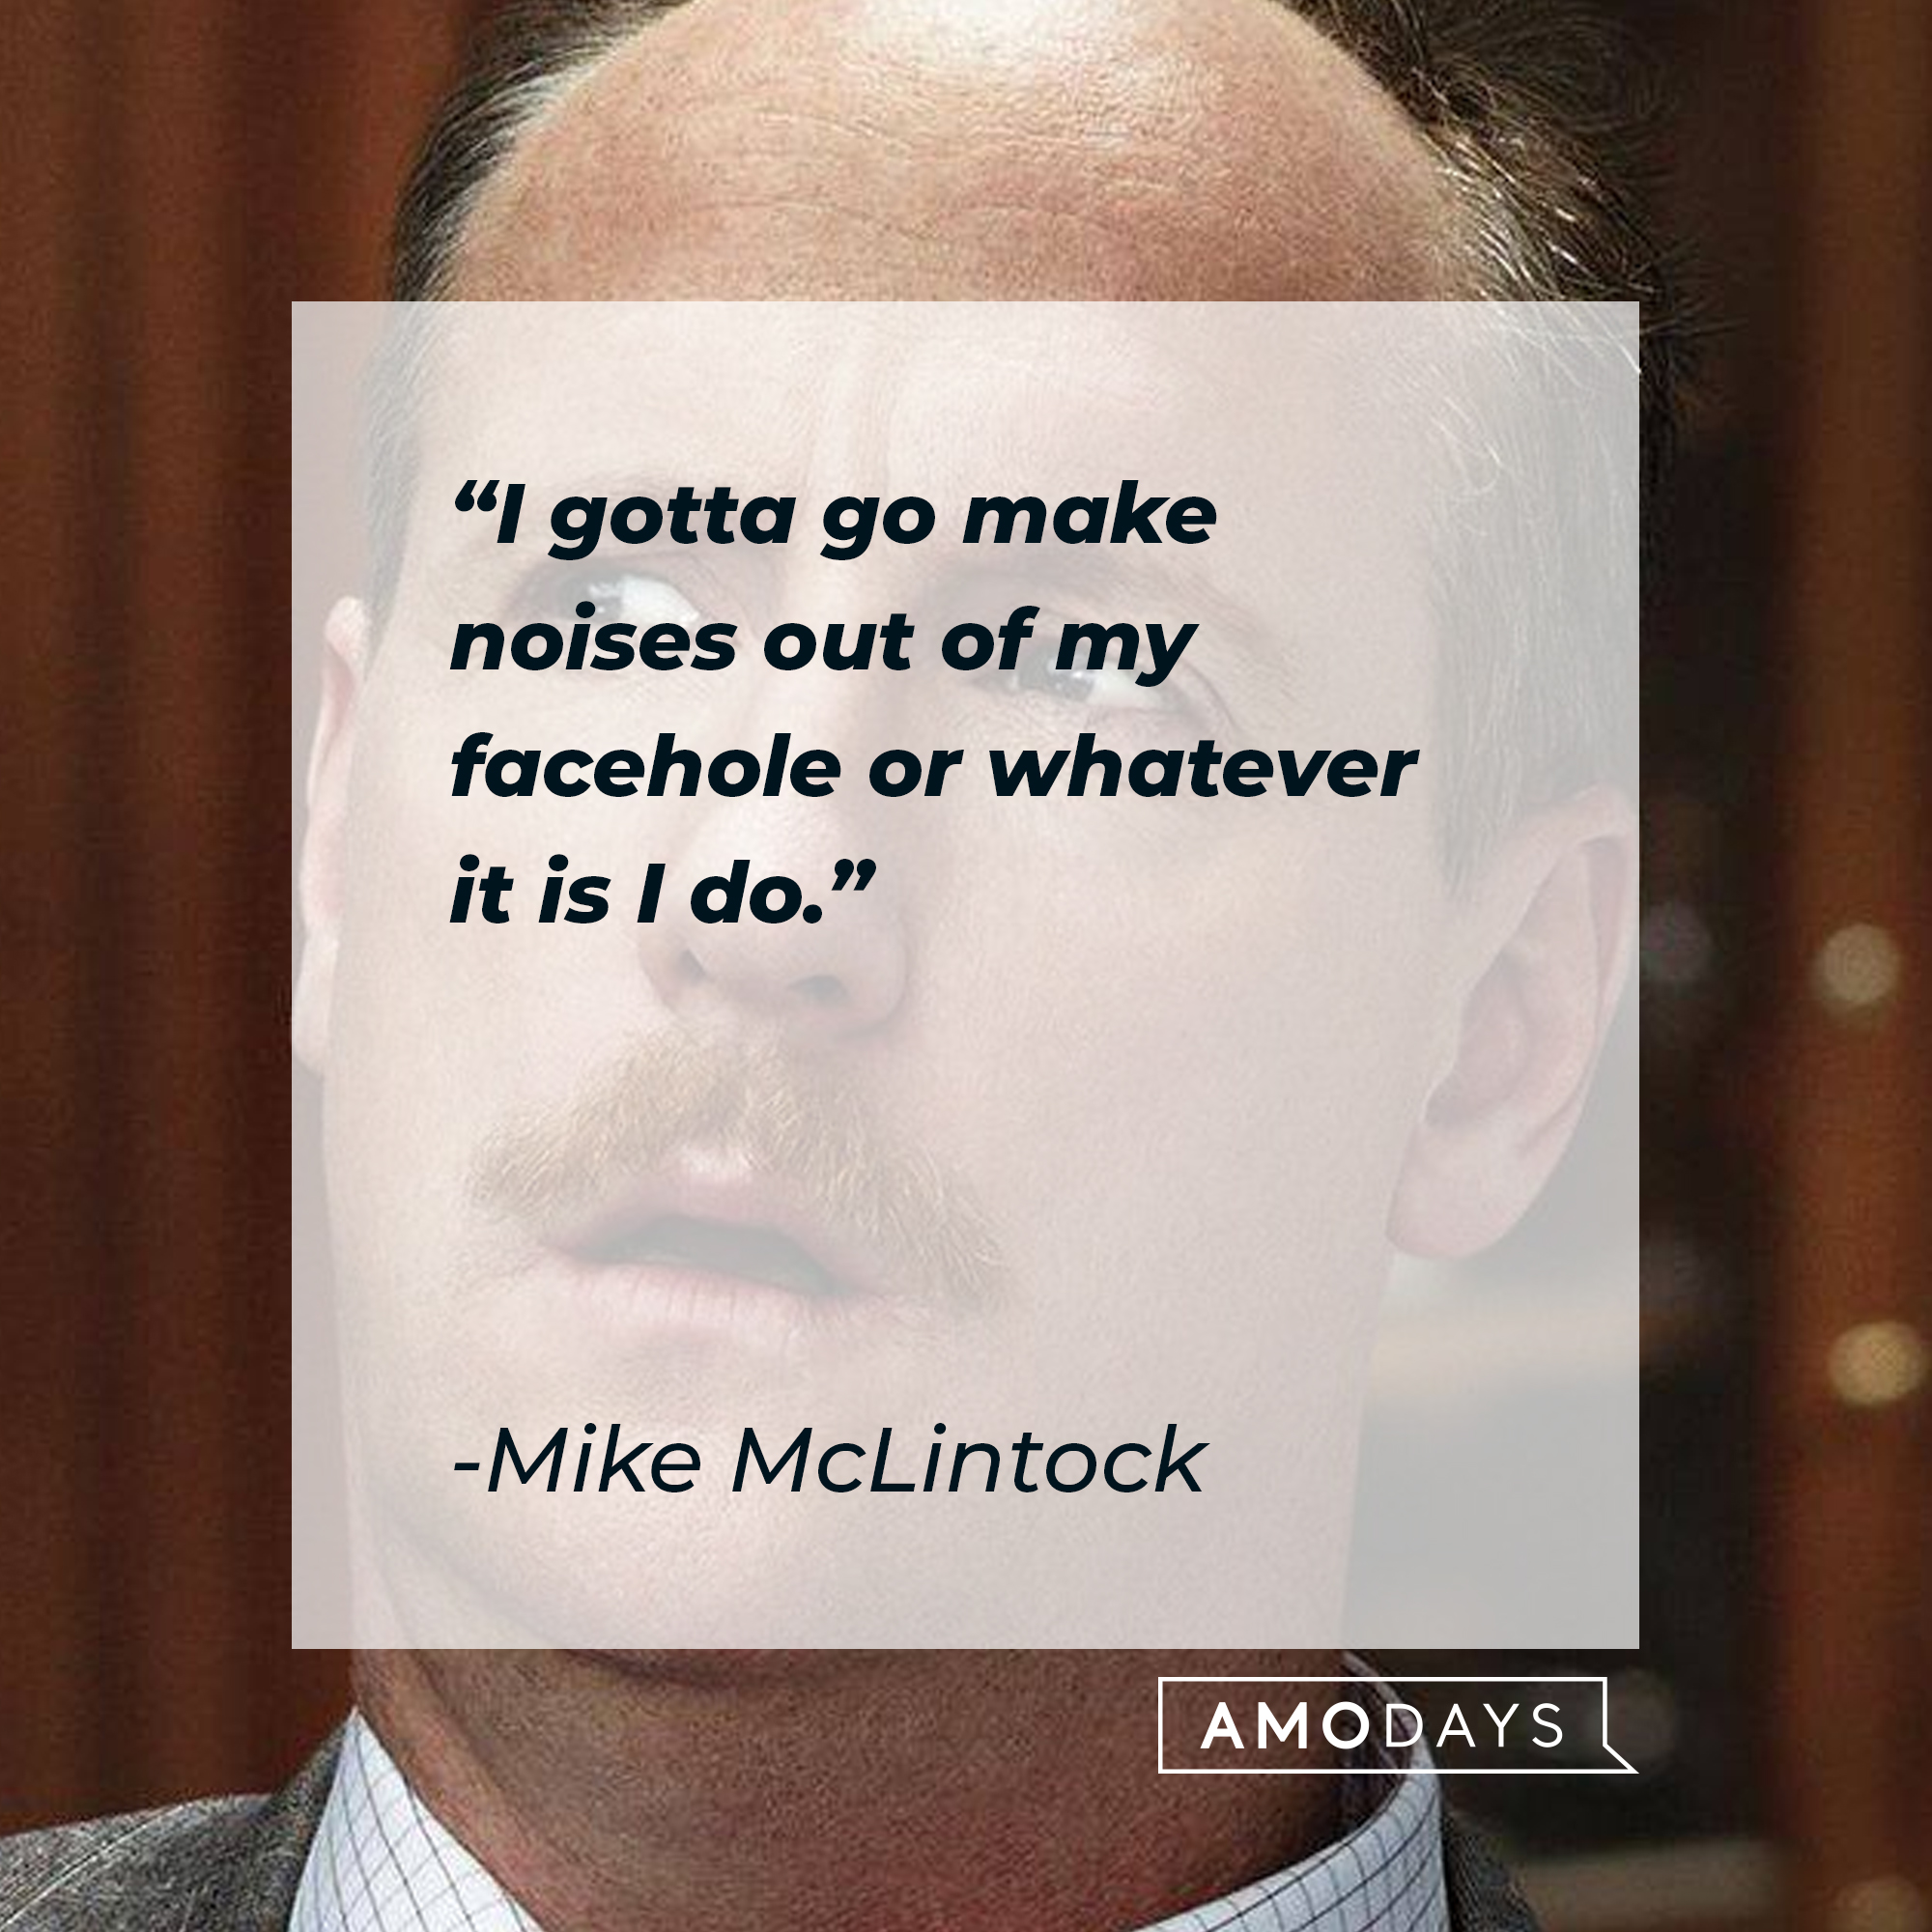 Mike McLintock, with his quote: “I gotta go make noises out of my facehole or whatever it is I do.” | Source: Facebook.com/veep